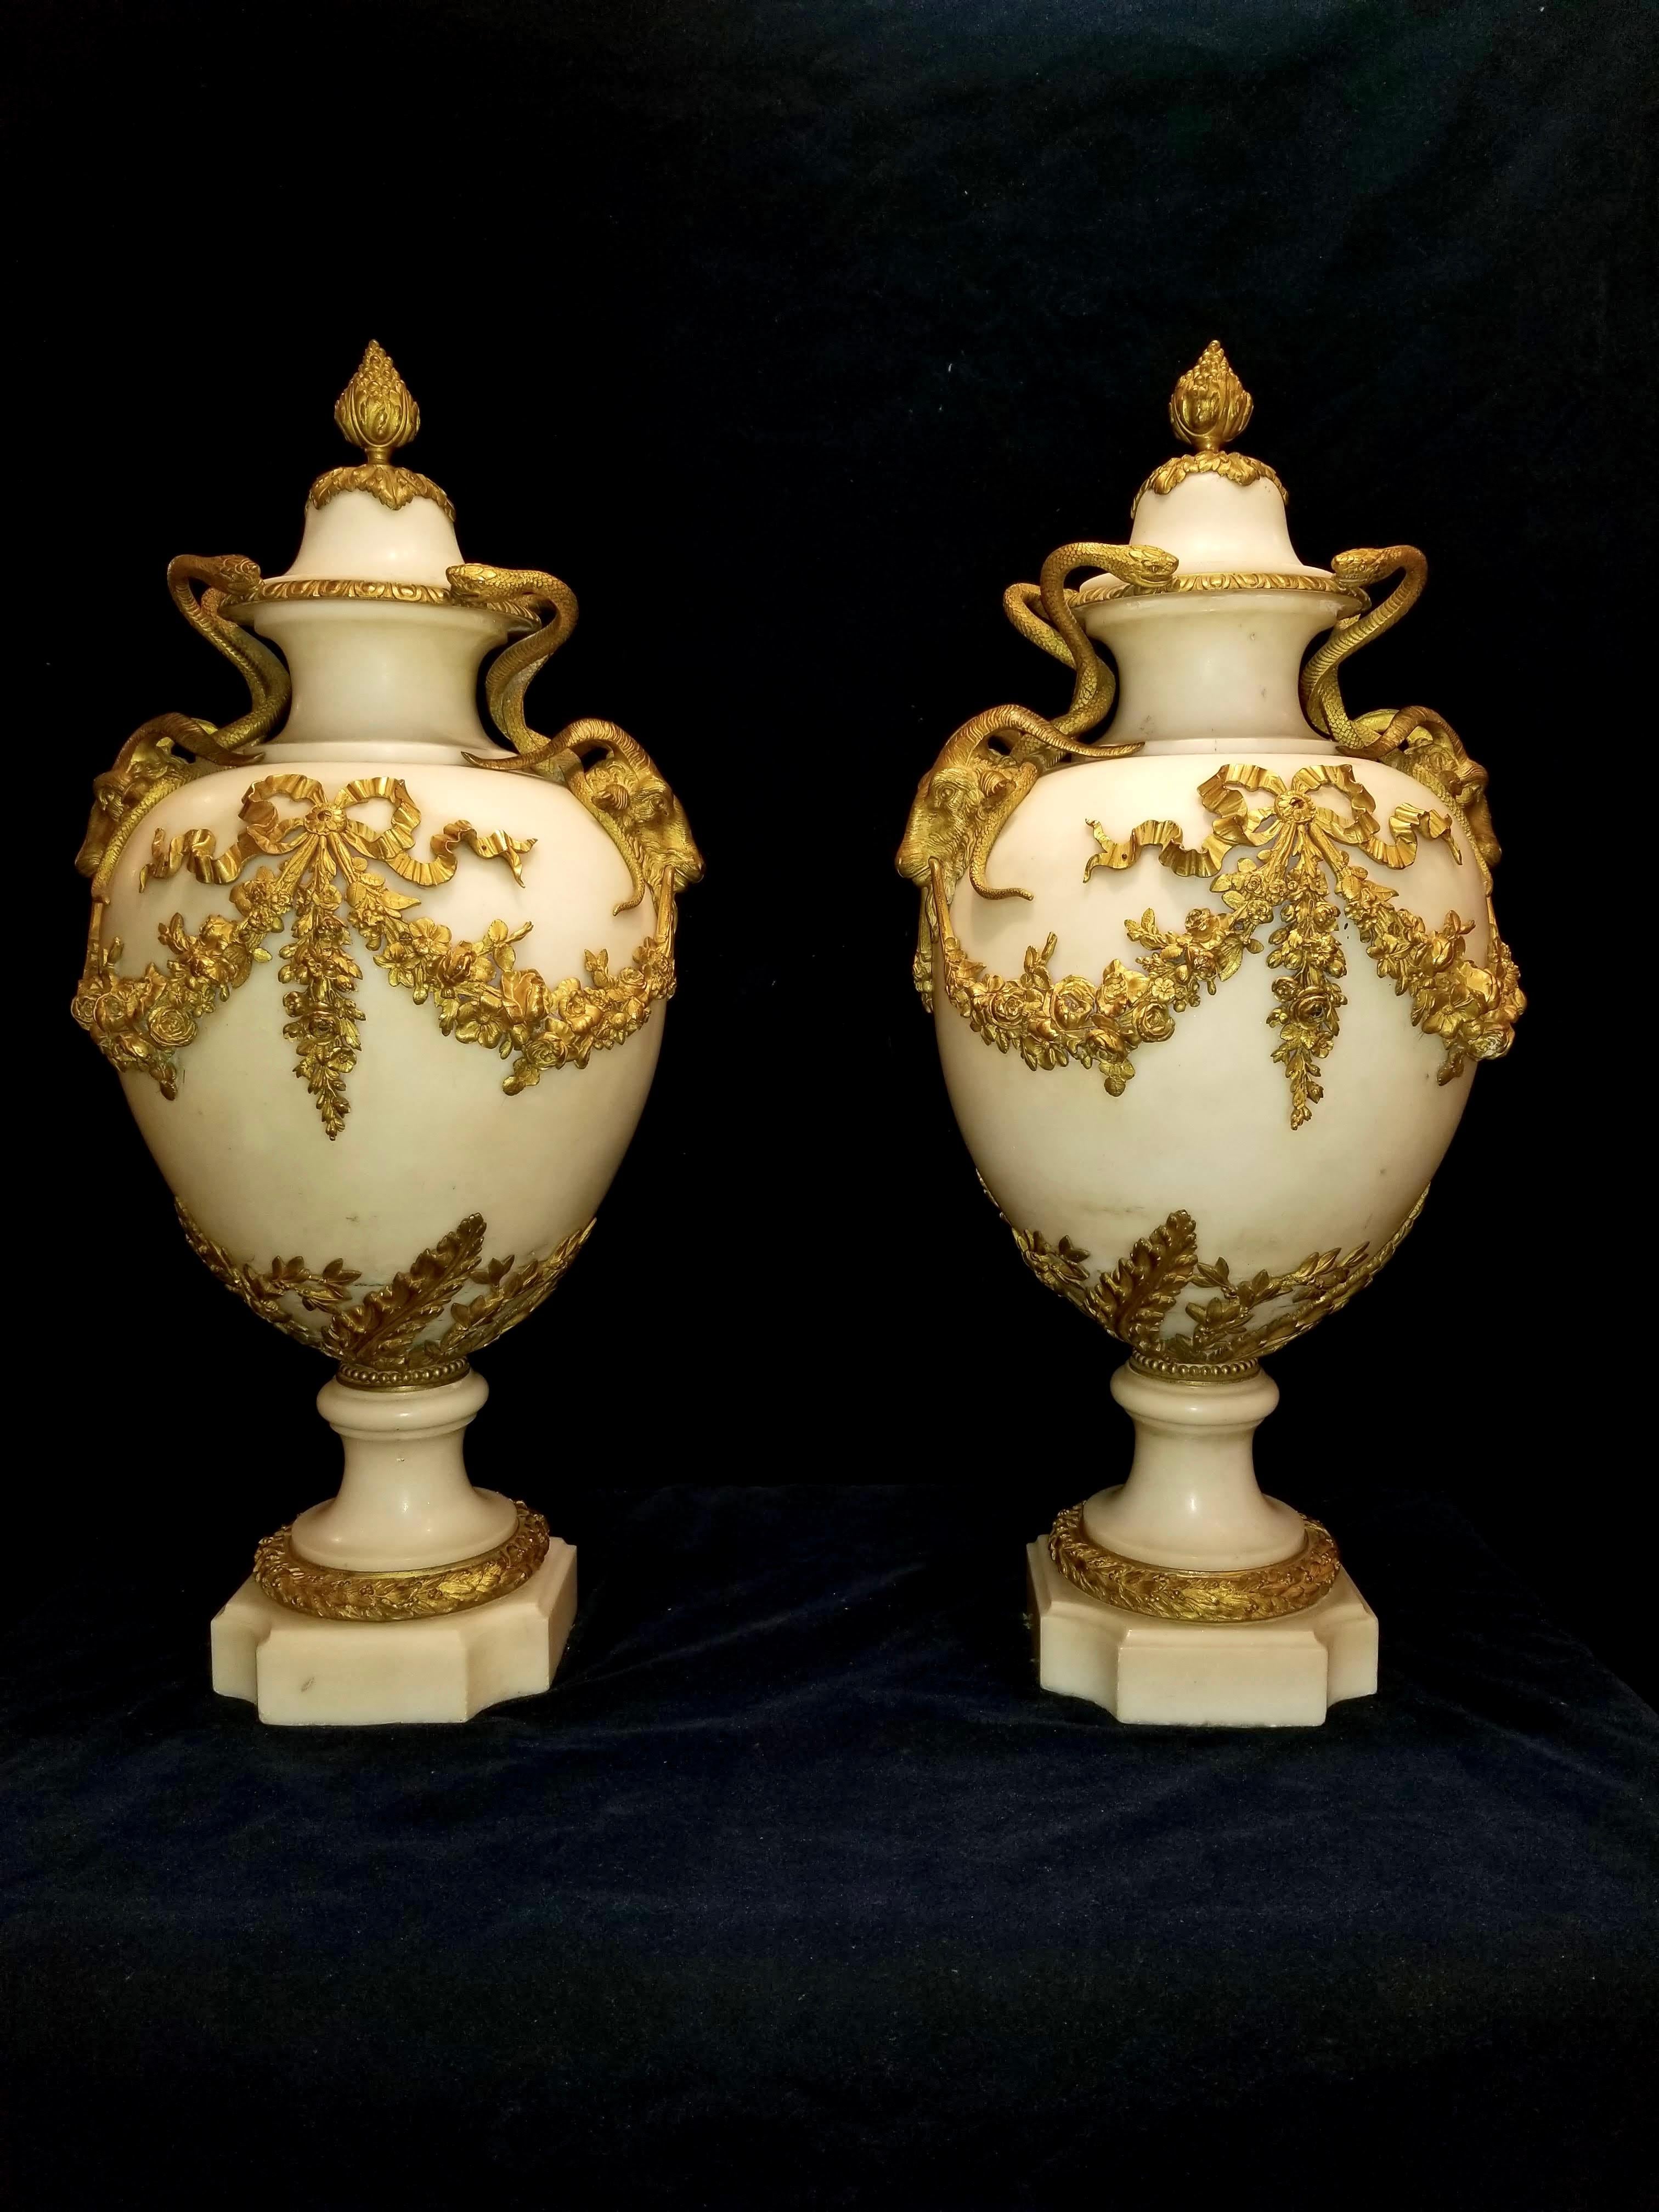 A very fine and monumental pair of antique French Louis XVI doré bronze and white carrara marble covered vases with ram’s heads and serpentine handles, attributed to Henry Dasson. These magnificent vases are made with the highest quality of flawless